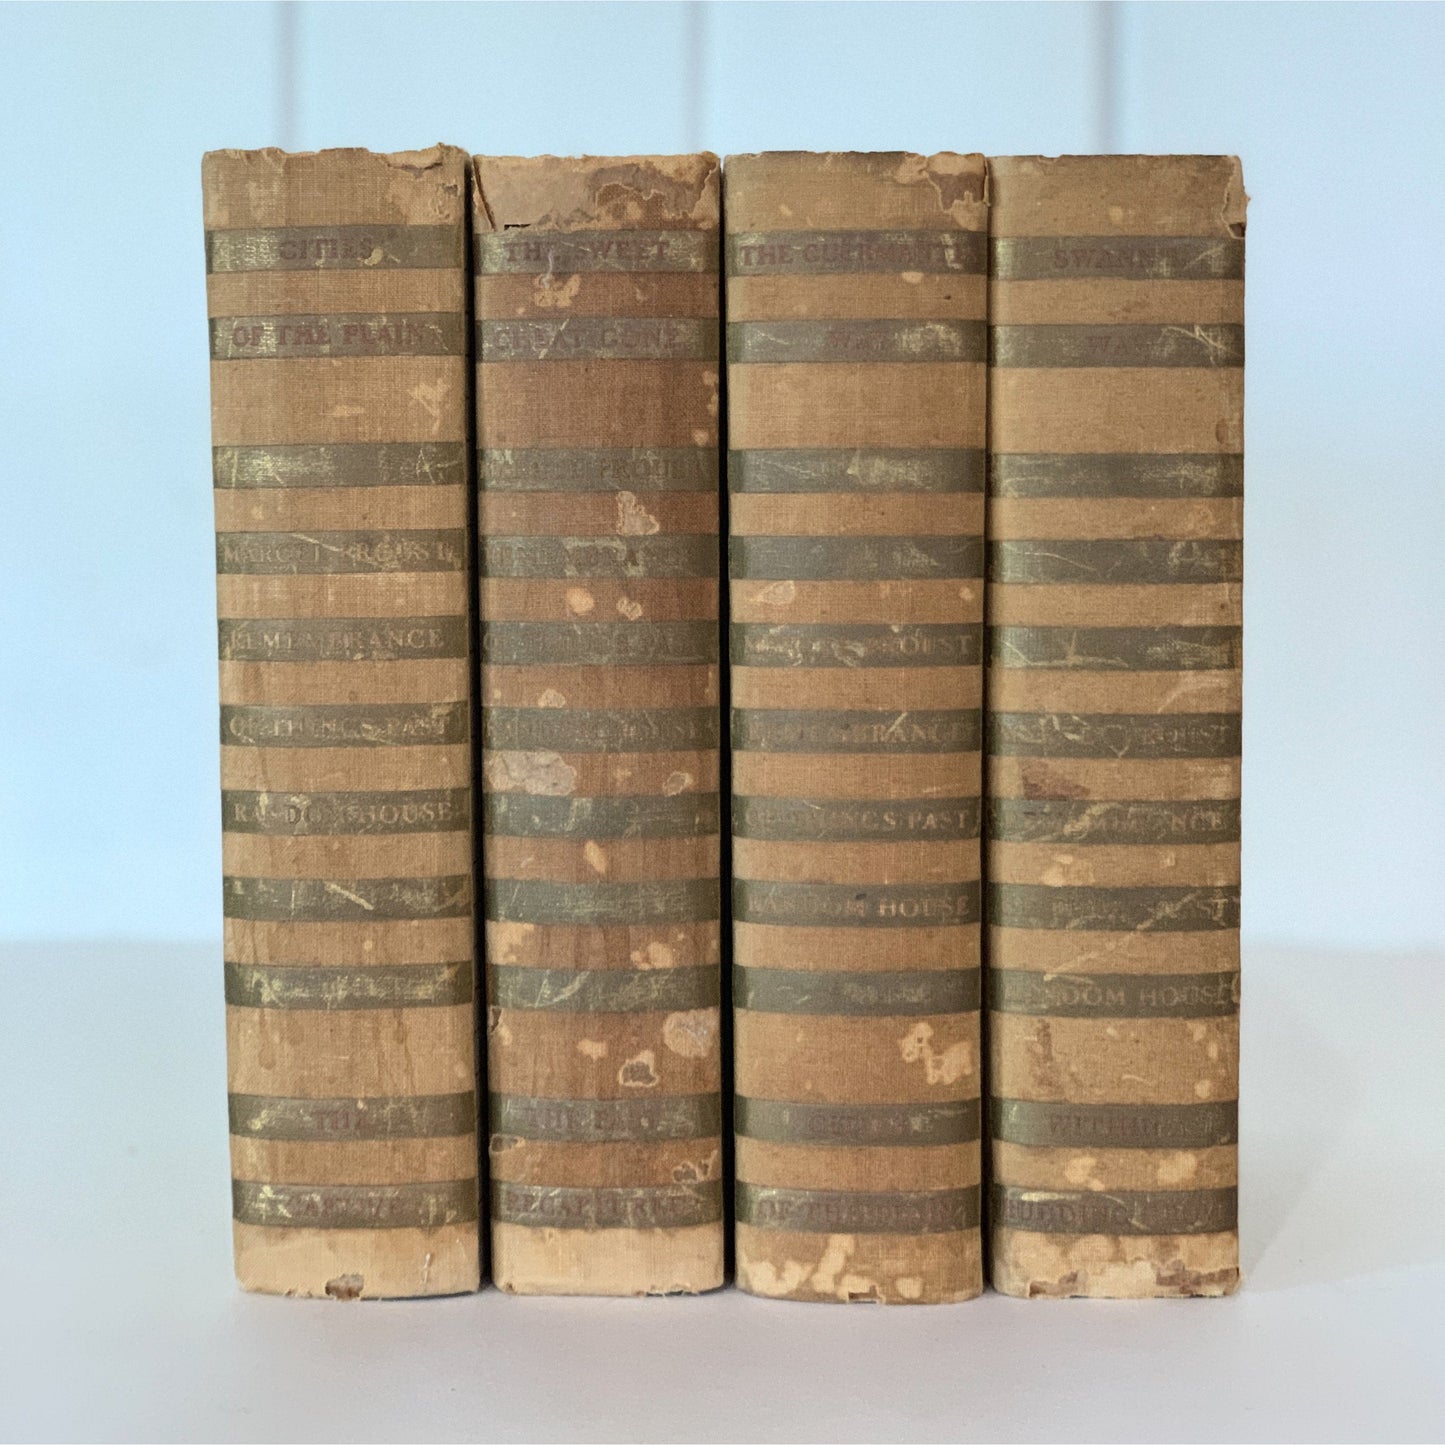 Remembrance of Things Past, Marcel Proust, 4-Volume Vintage Book Set, 1934